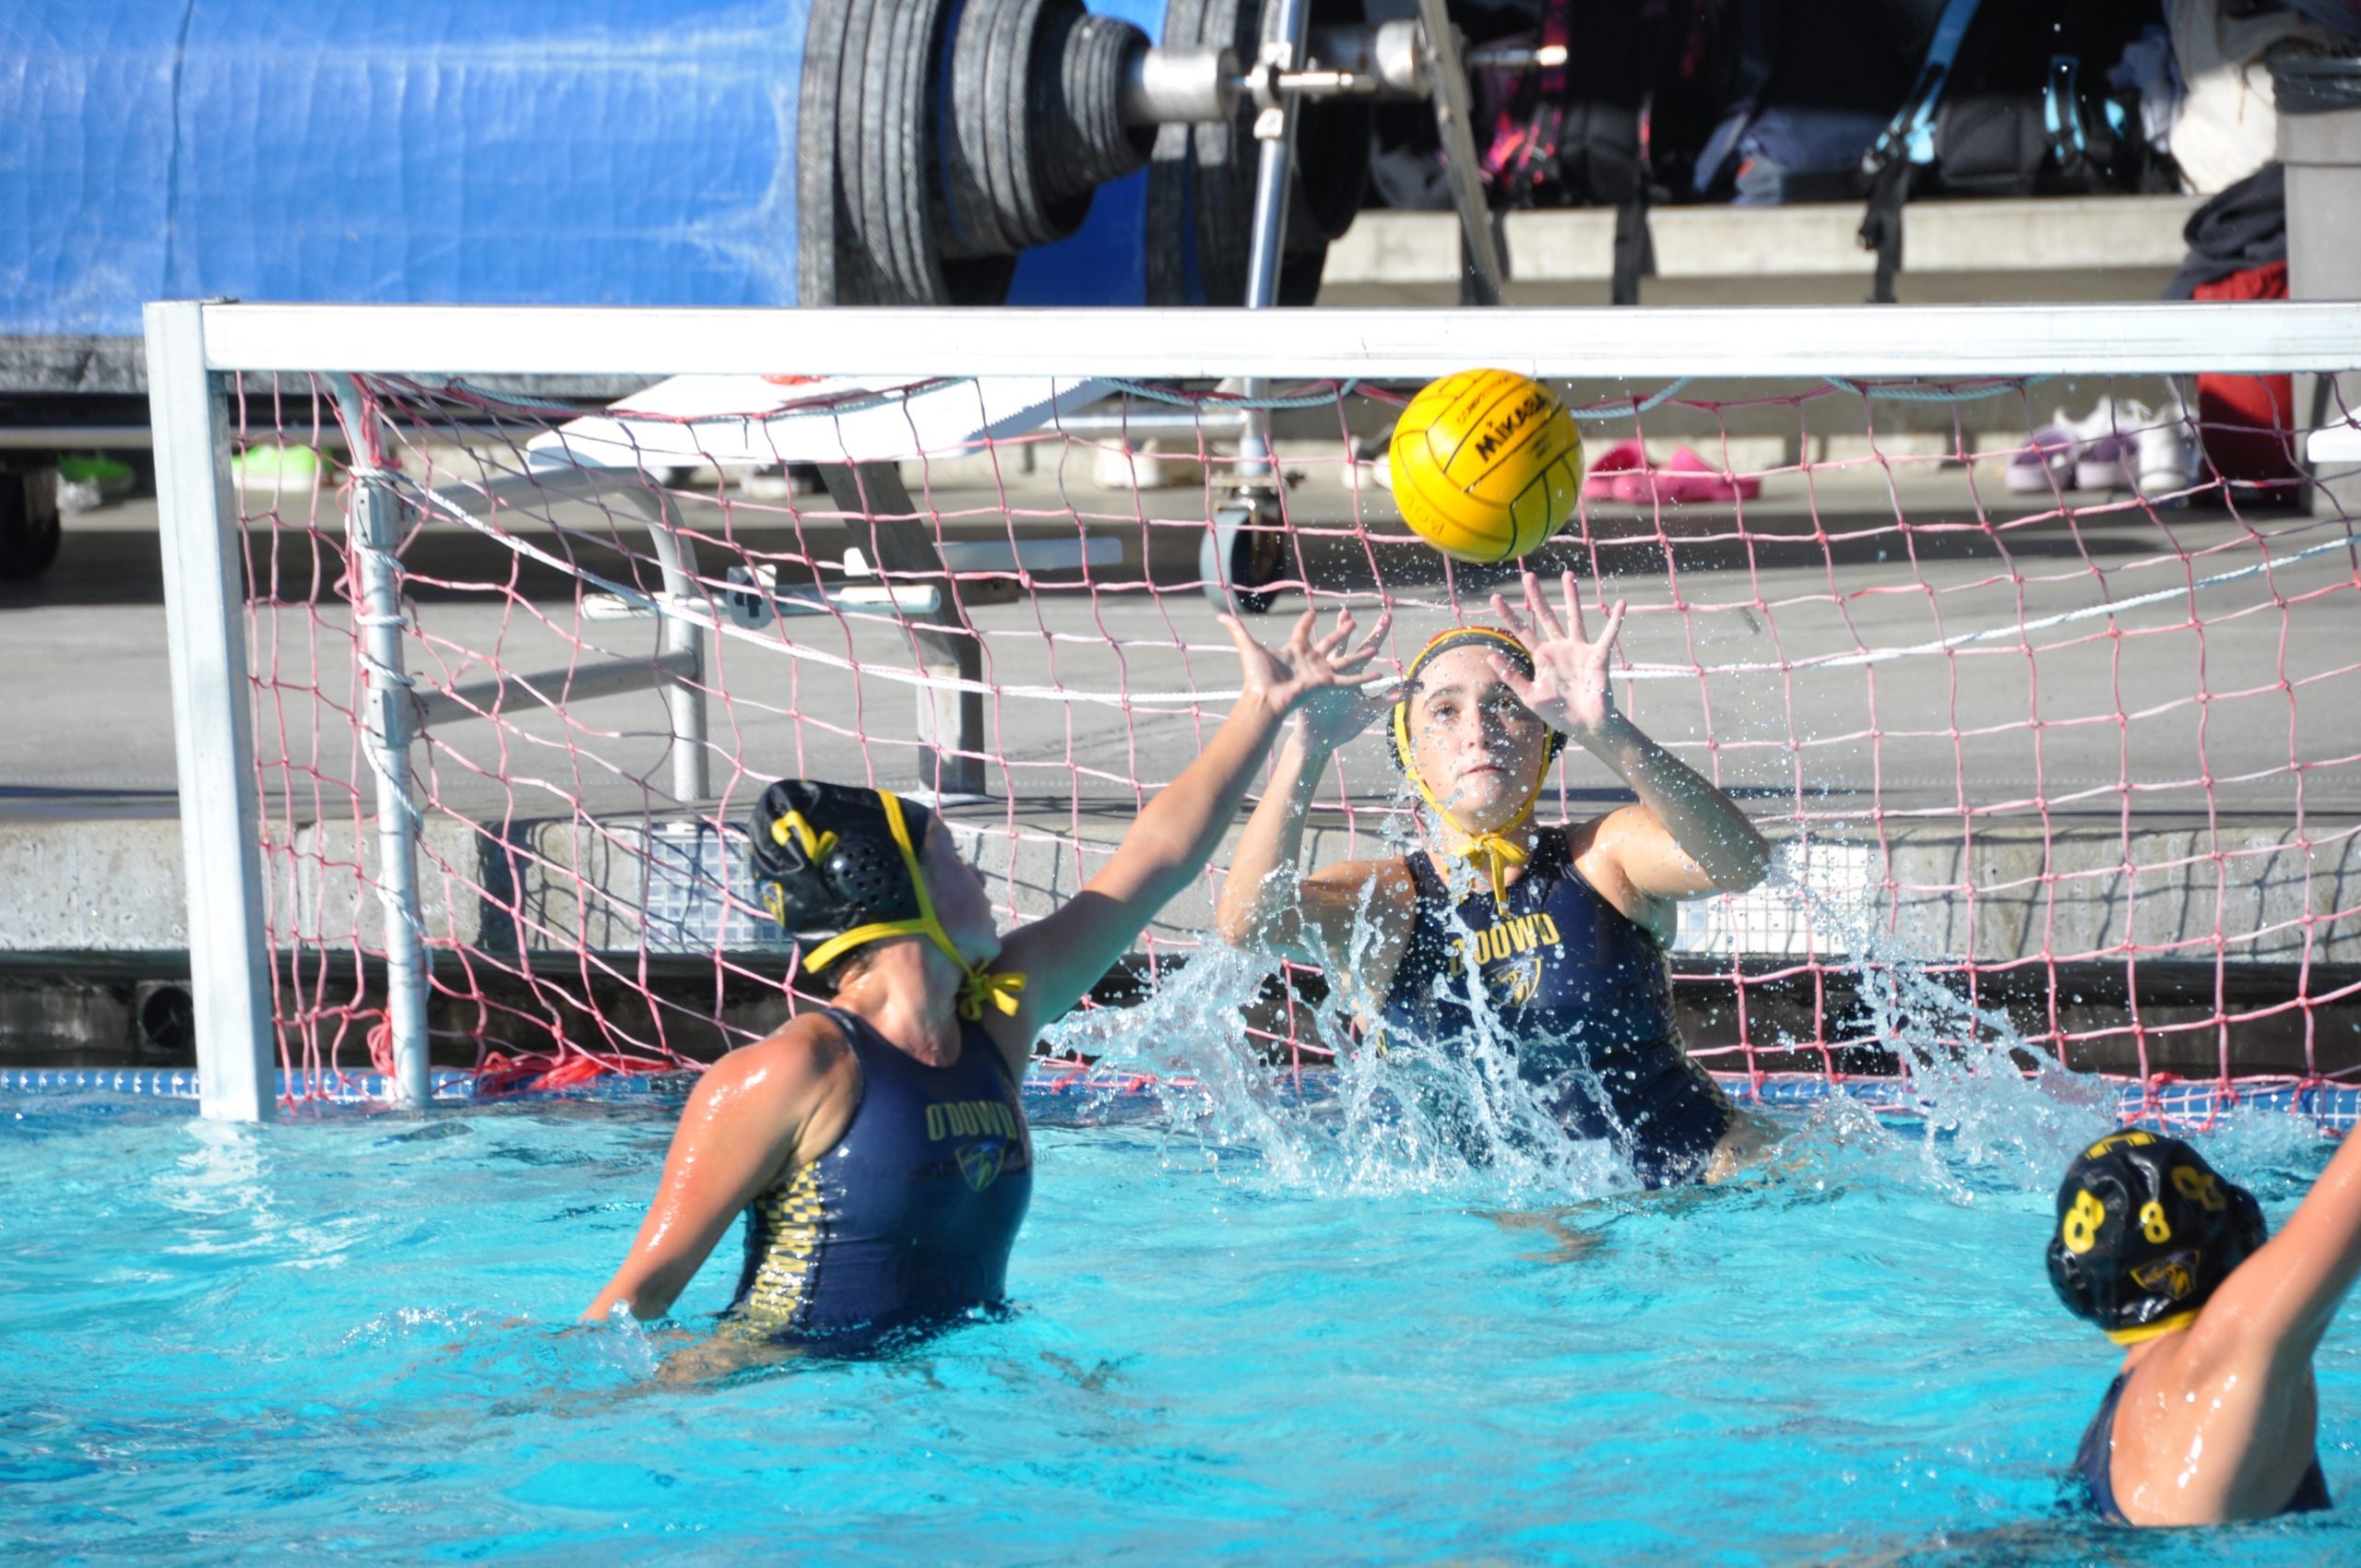 Water Polo: A goalkeeper catches a ball, Bishop O'Dowd High School women's team training event. 2560x1700 HD Wallpaper.